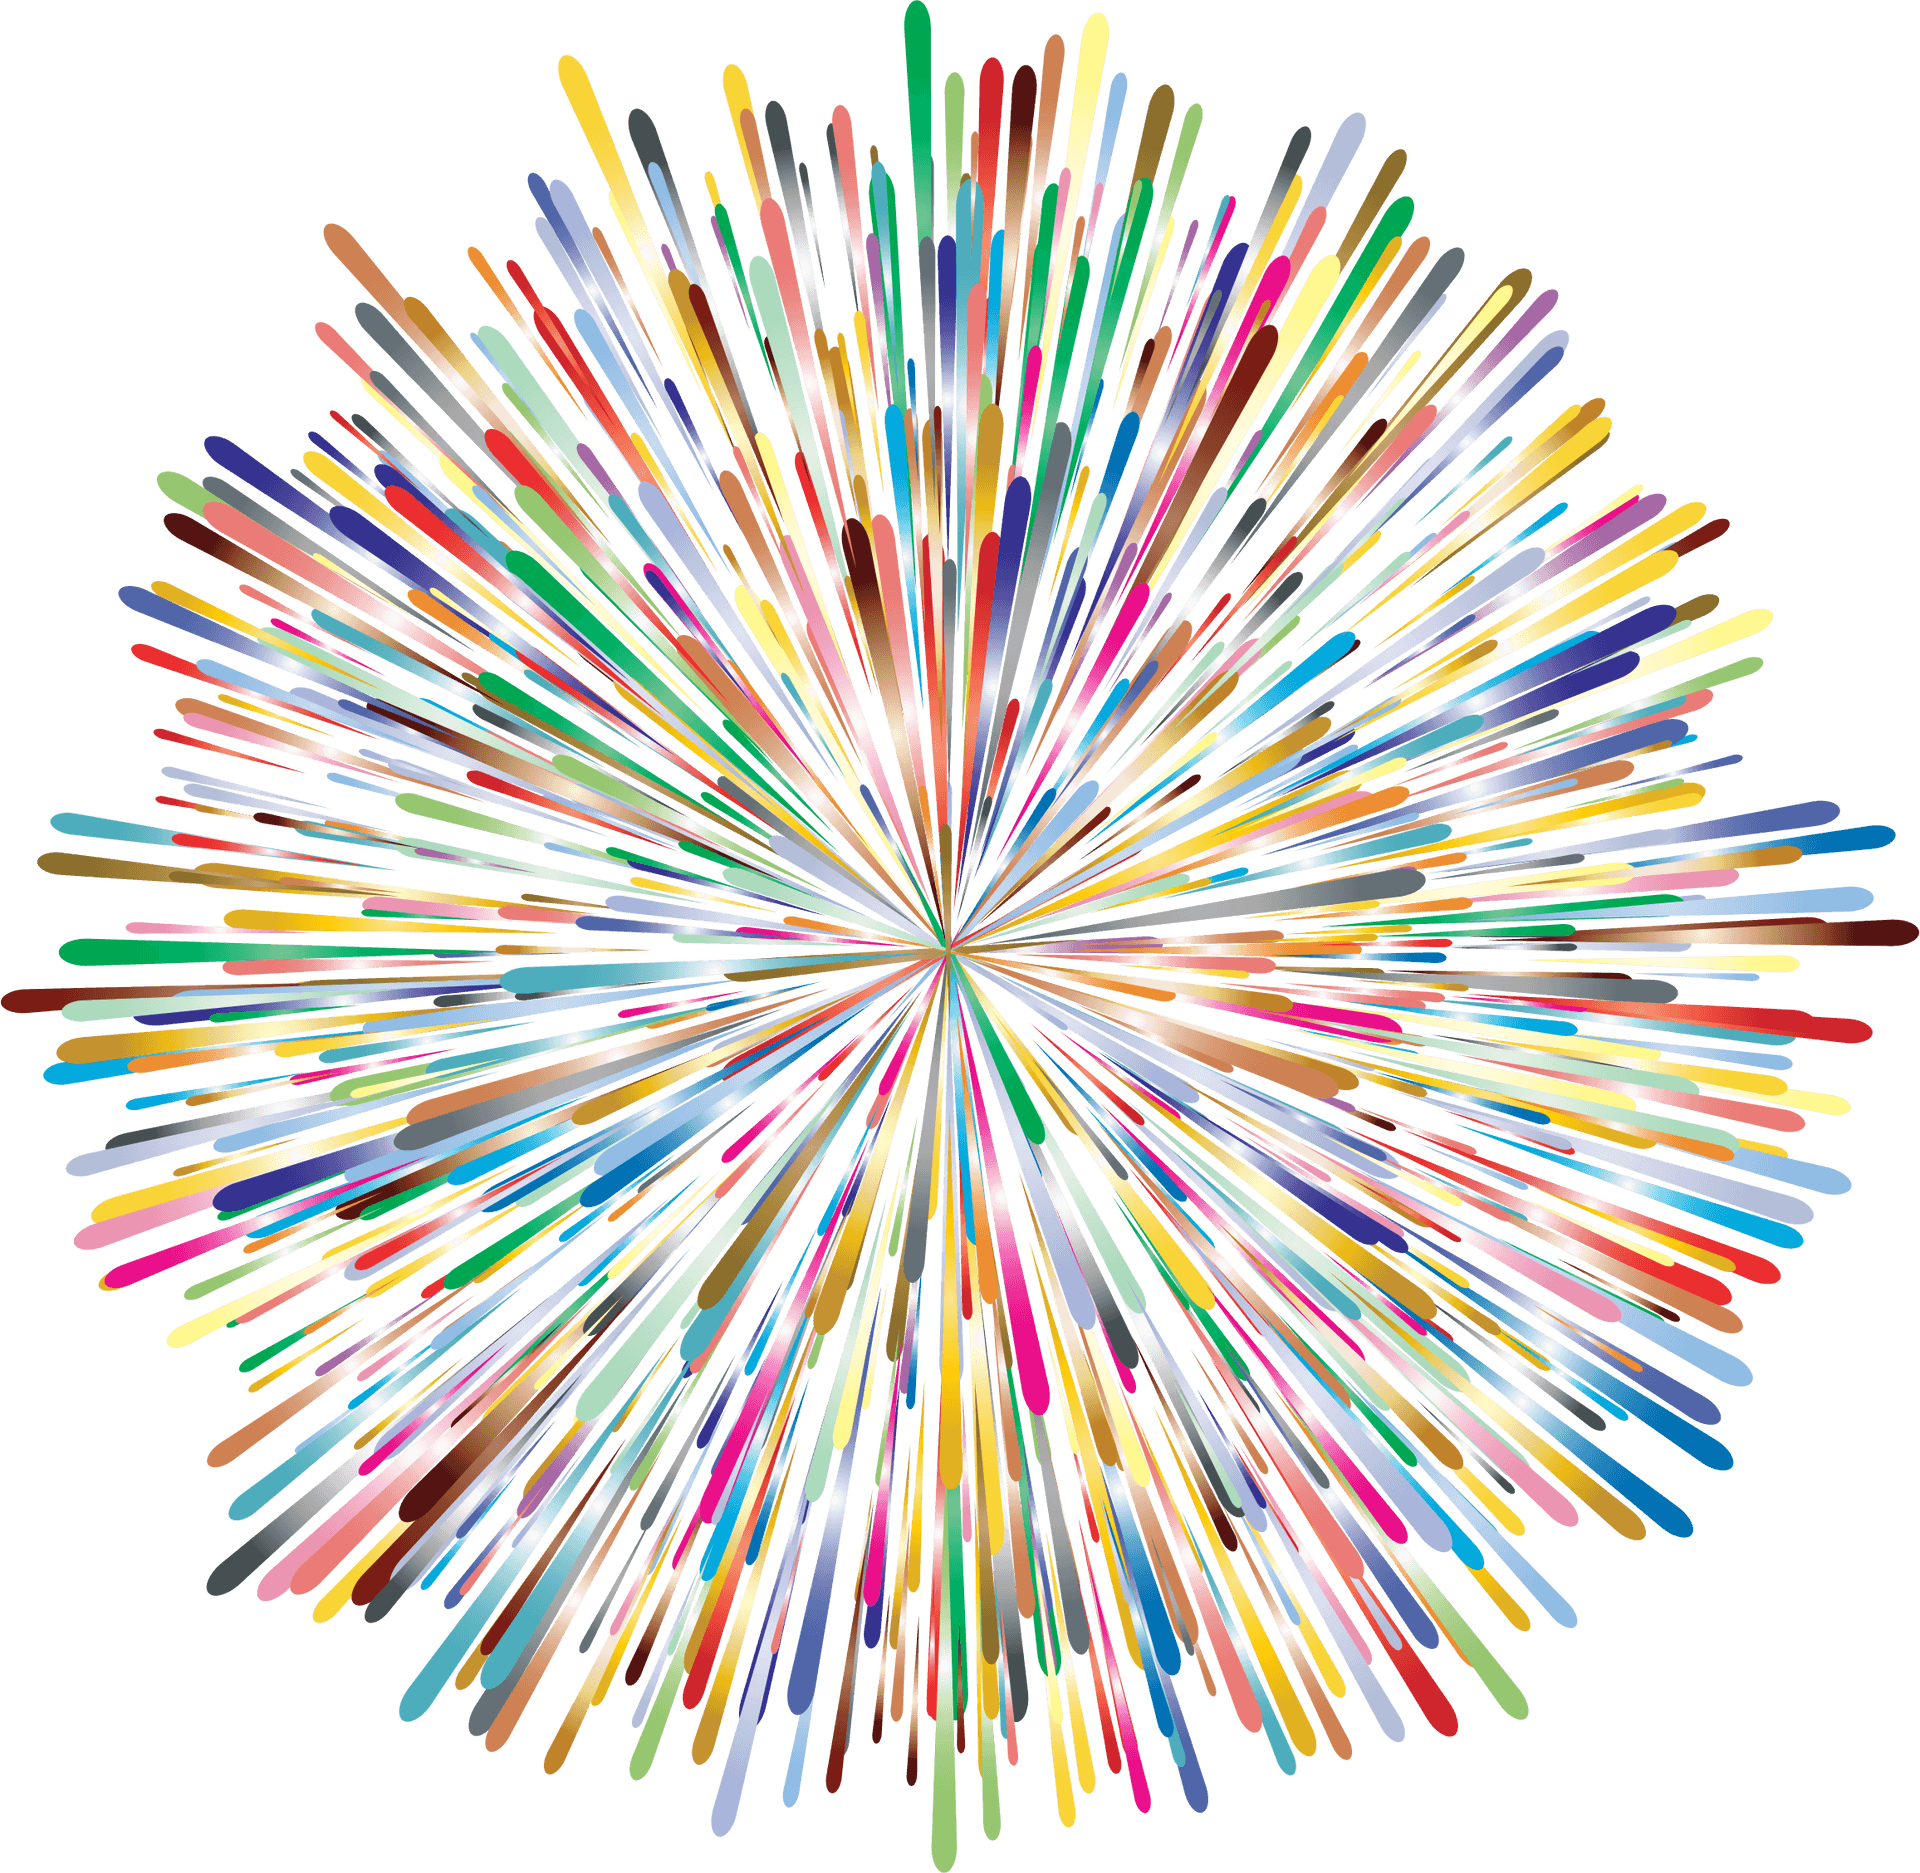 Colorful Firework Explosion Graphic PNG image